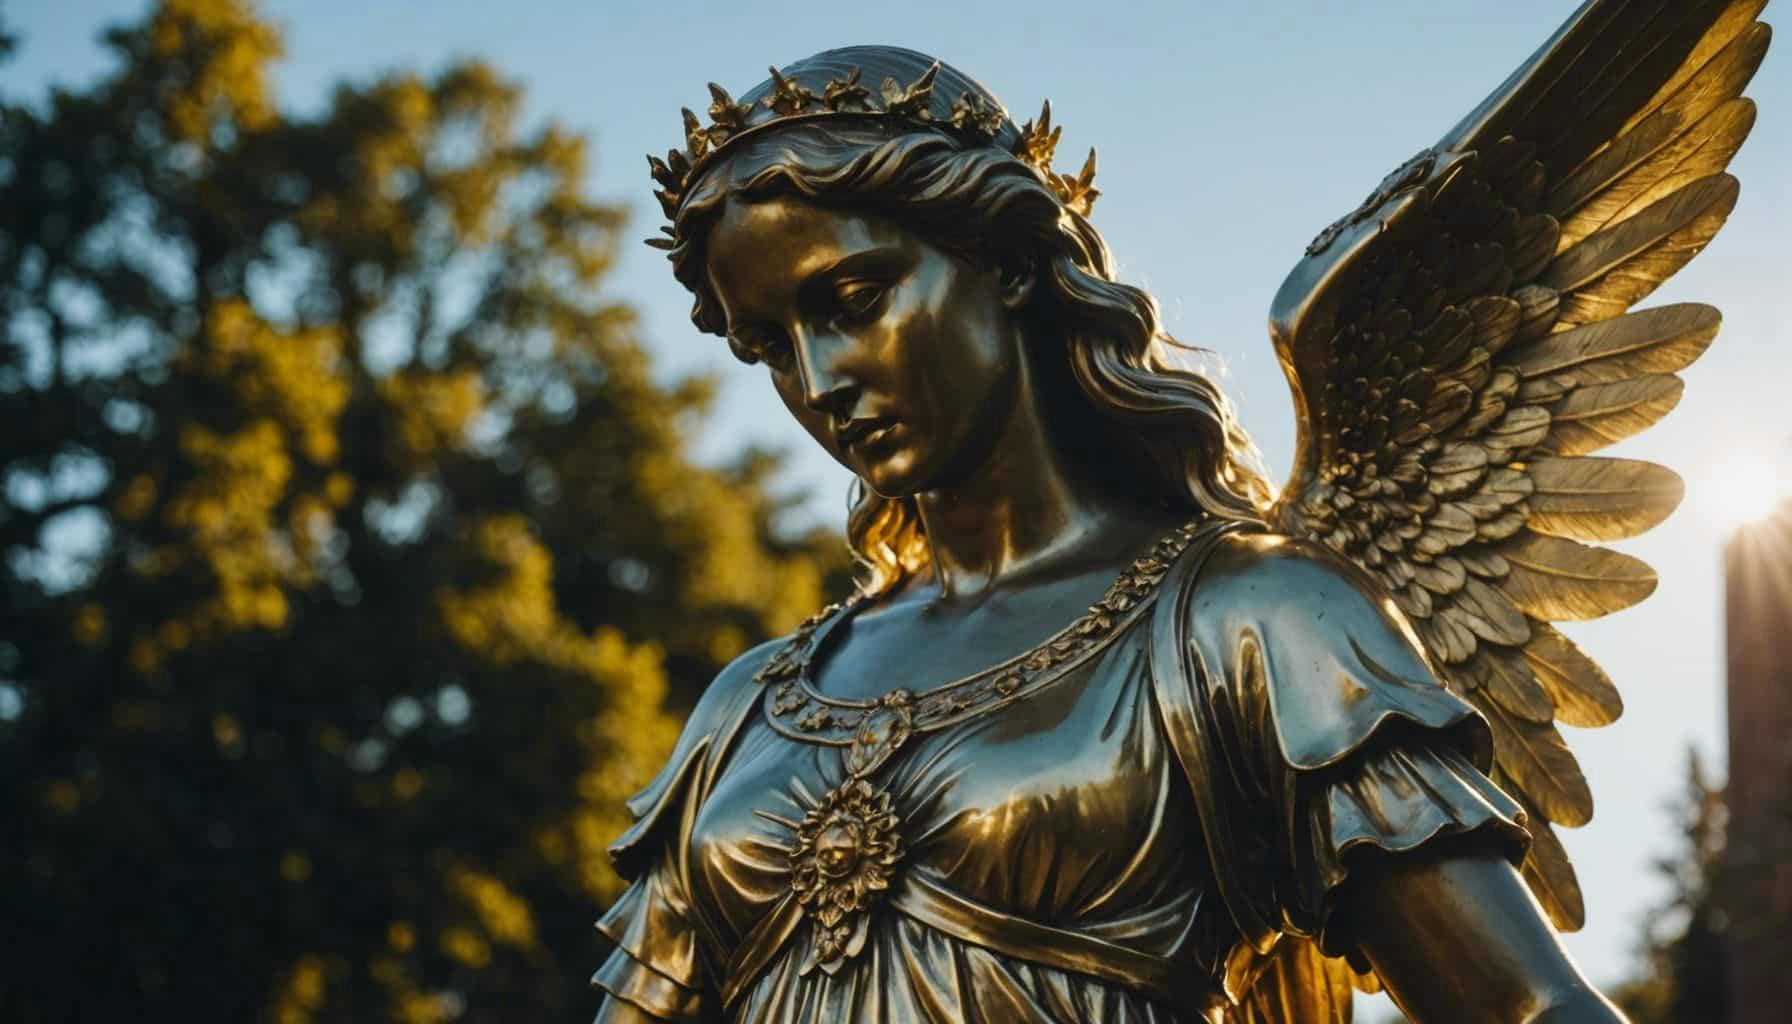 The Angel Statue in Russia: Symbolism, History, and Mystique